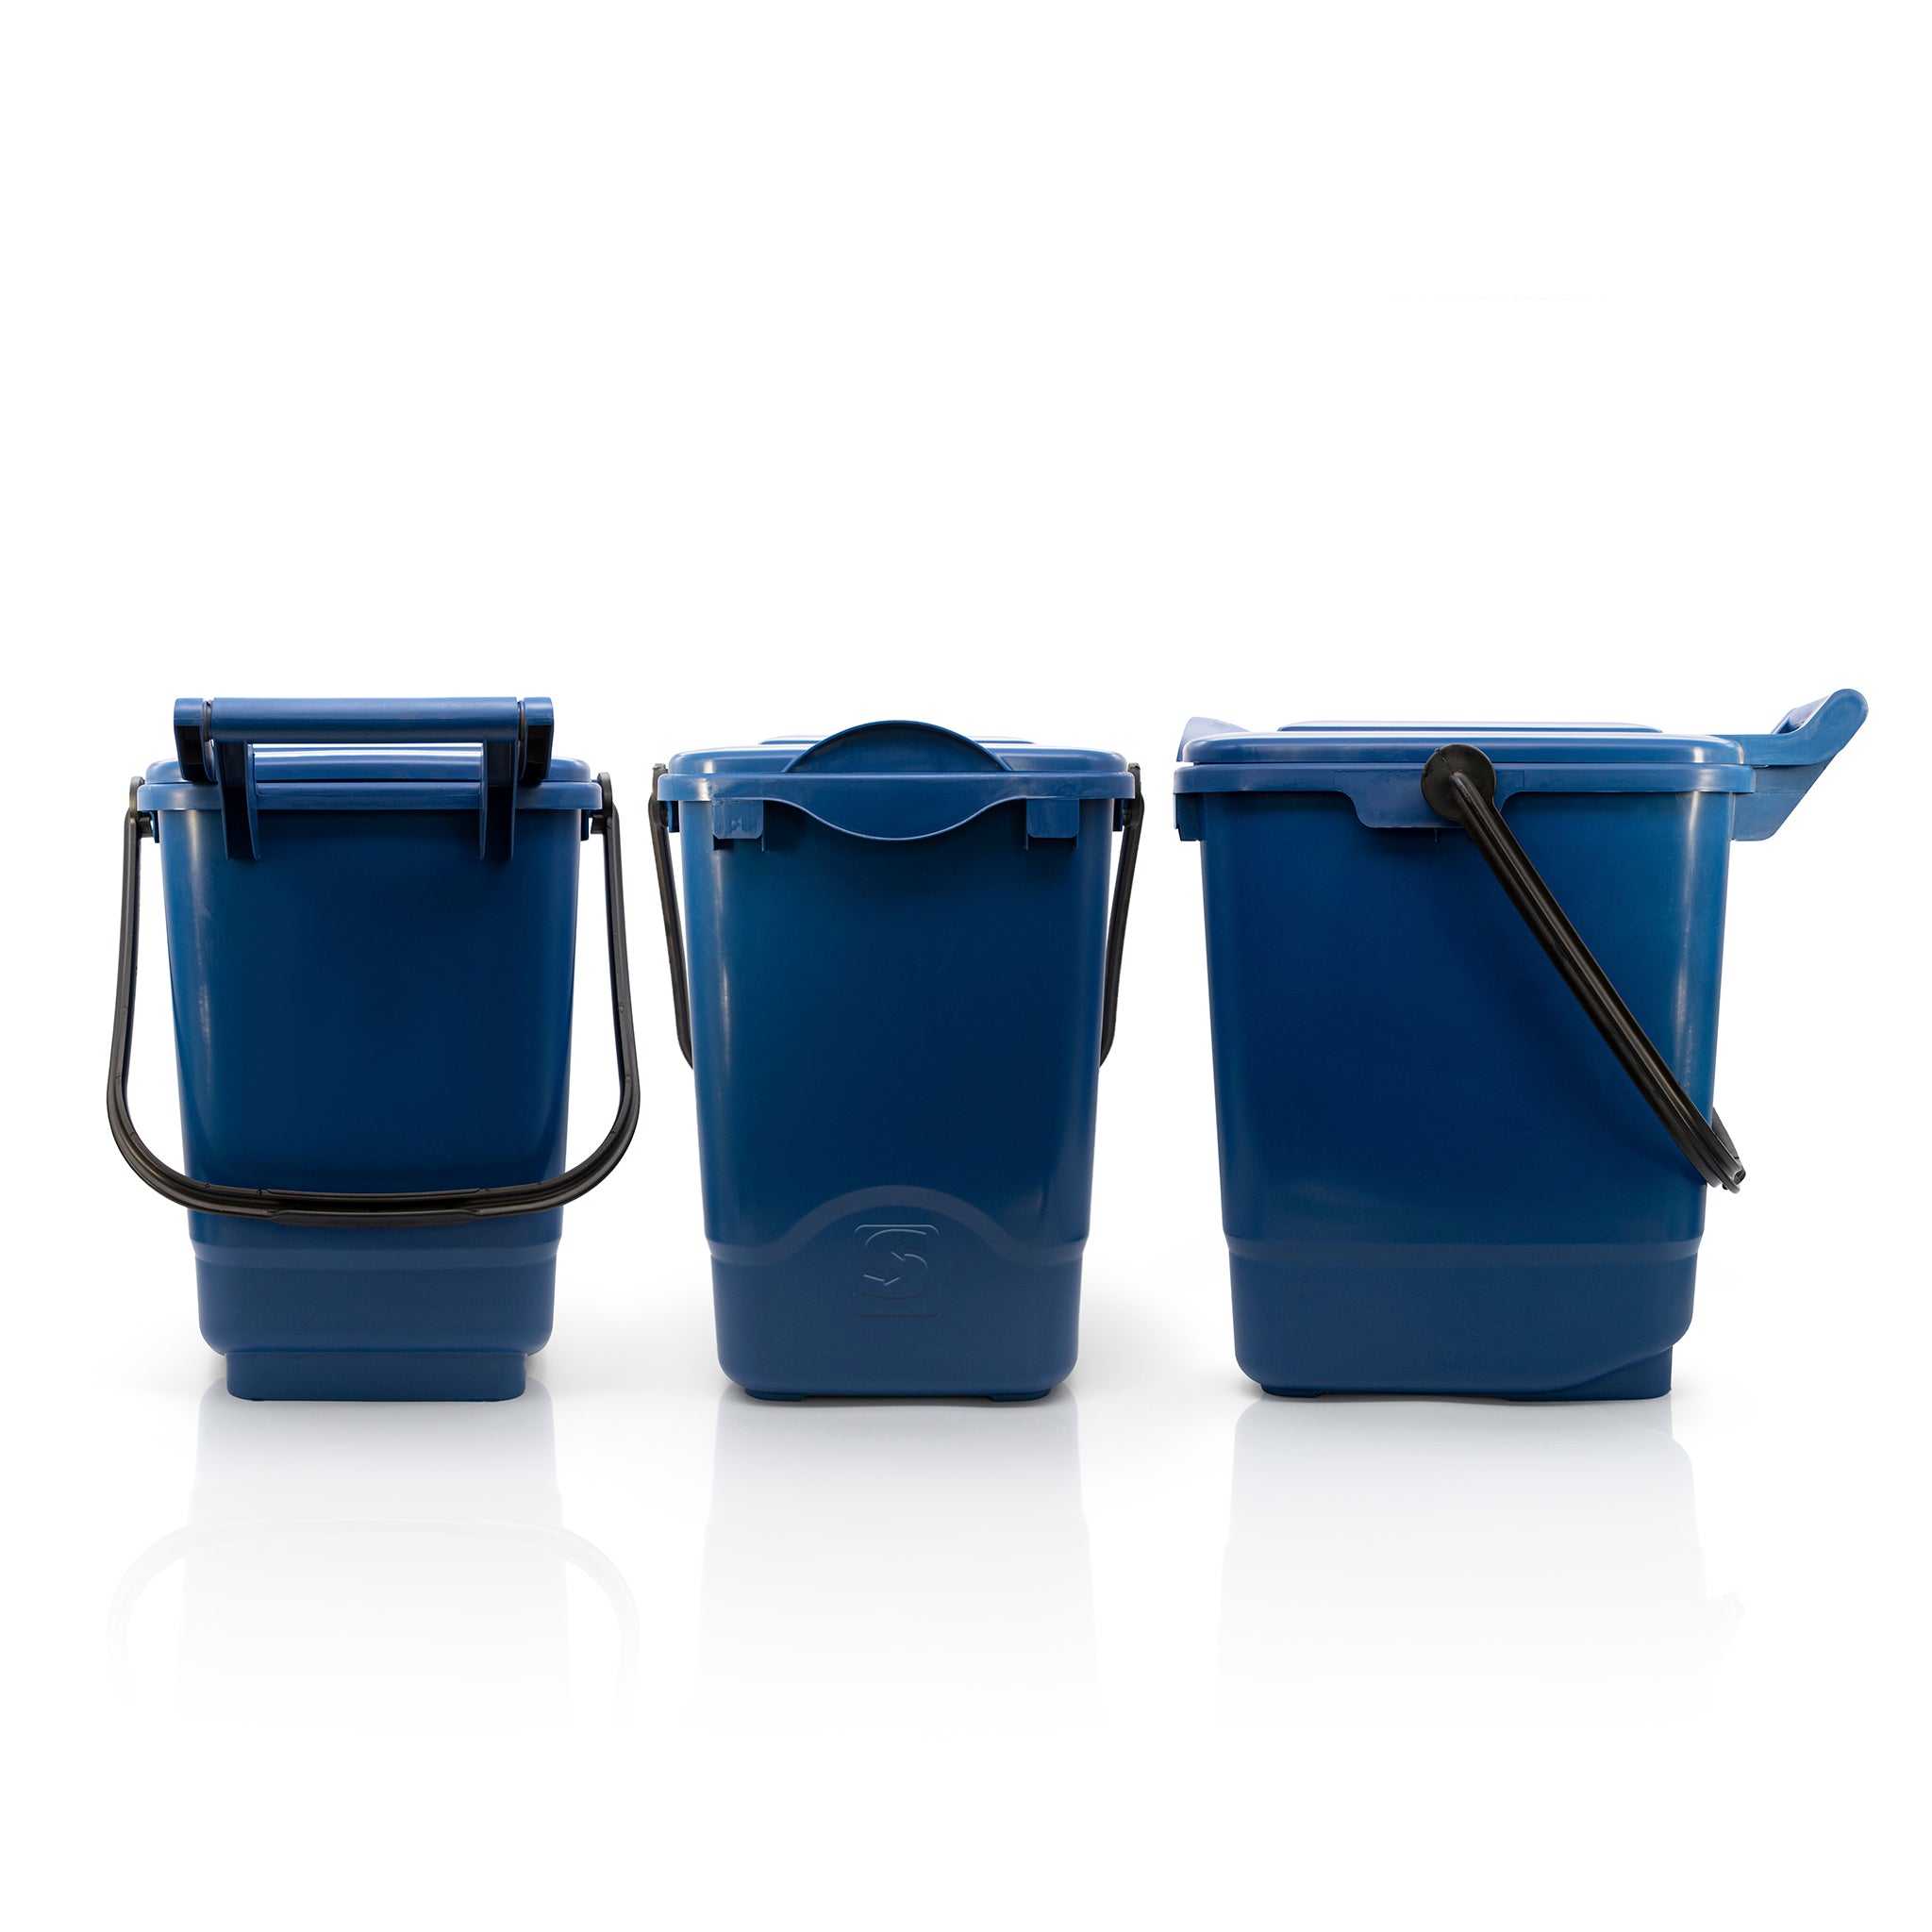 Front, rear, and side of a blue nappy bin with lid, made from 100% recycled plastic material